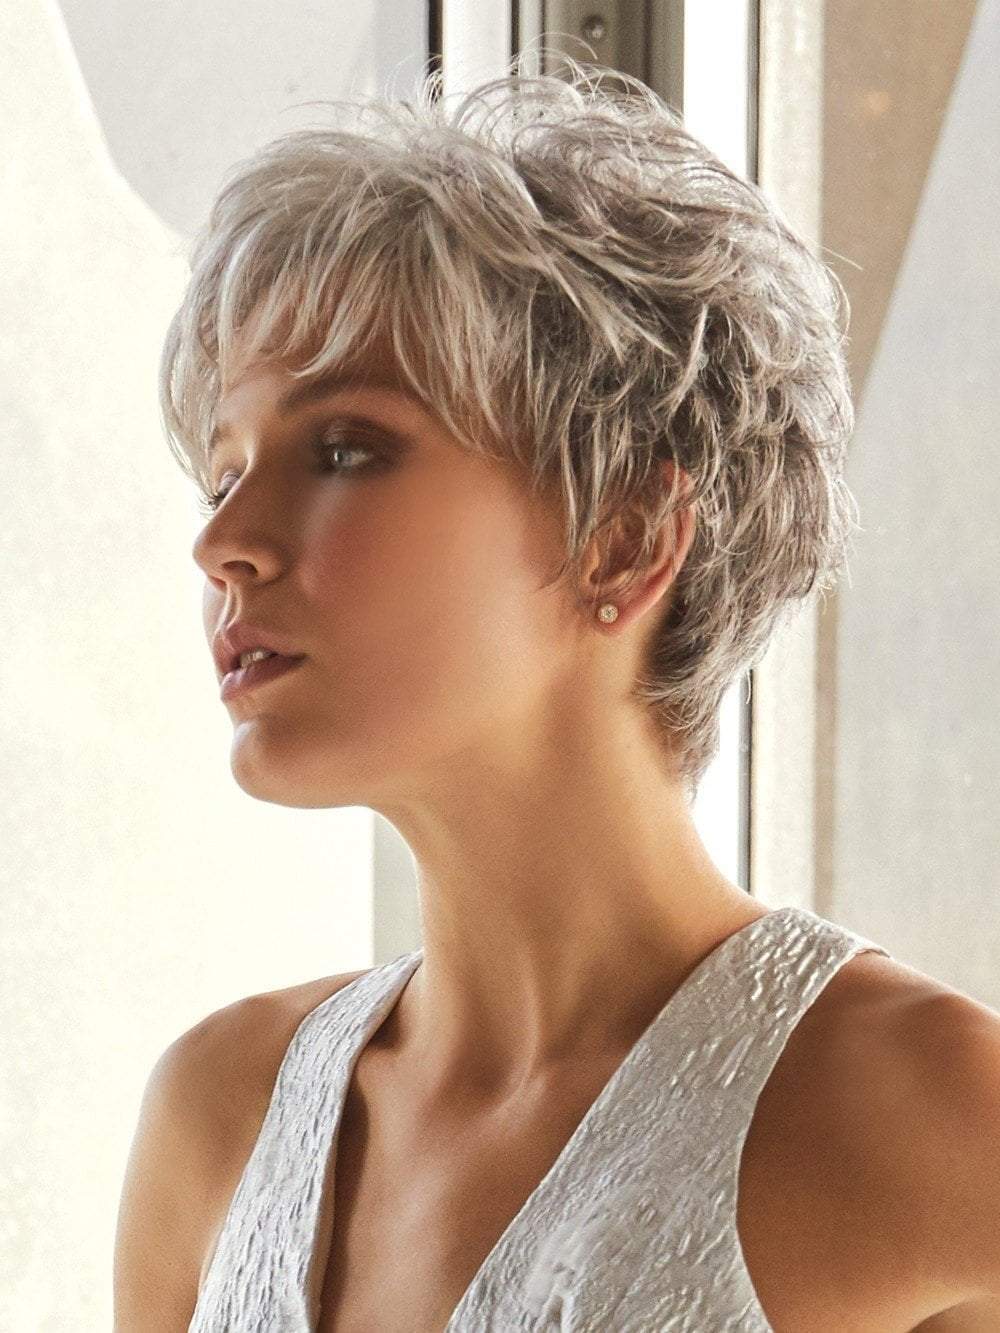 This soft layered short pixie can be brushed over the top to create a touch of height.